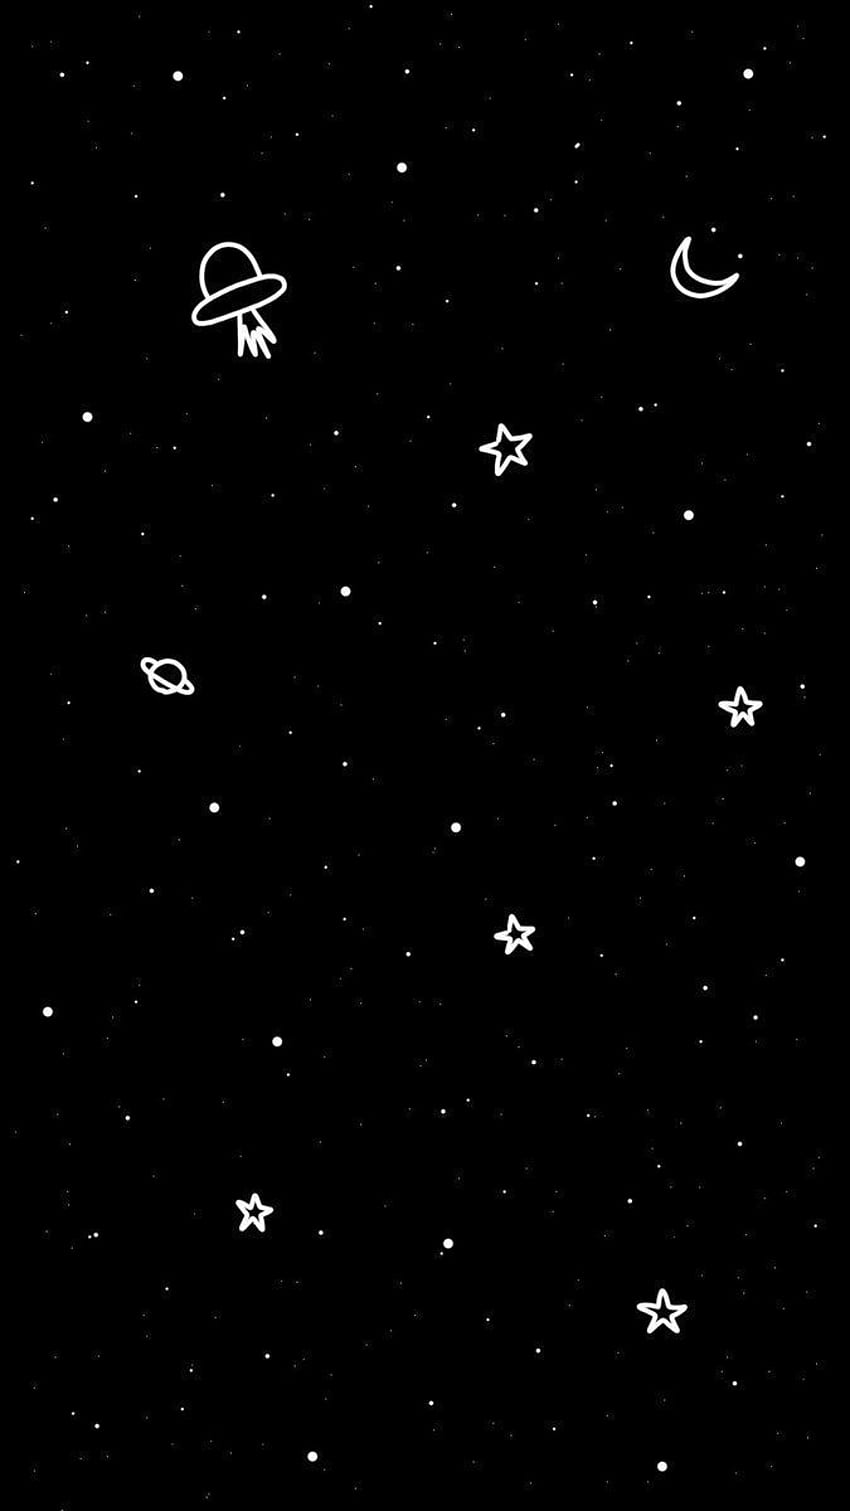 Black aesthetic wallpaper with white stars and a spaceship - Stars